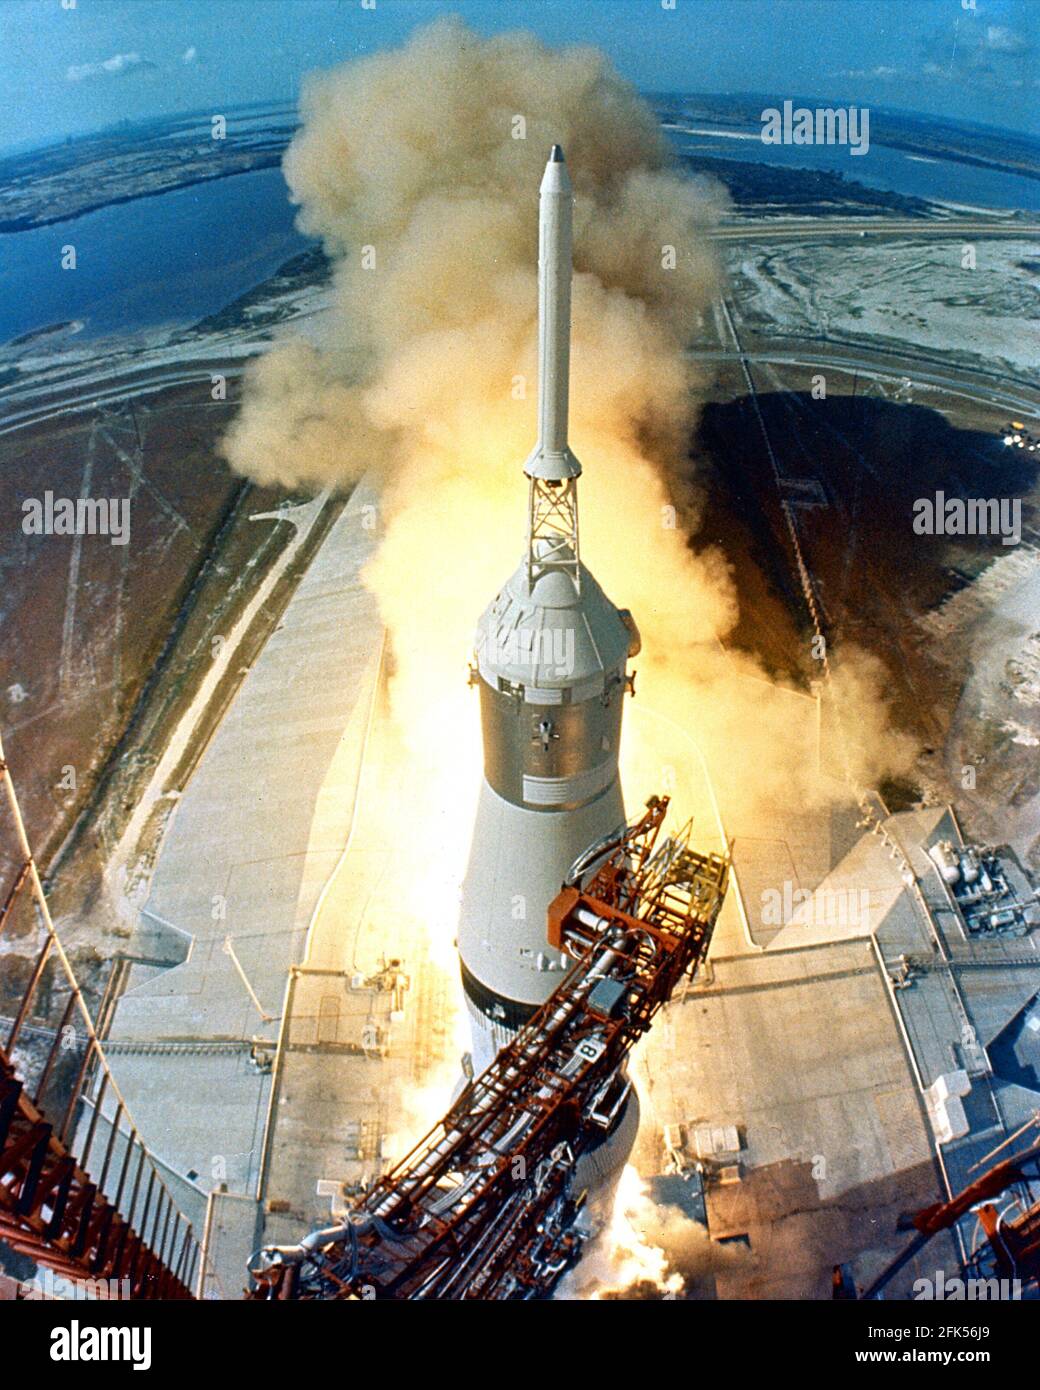 Cape Canaveral, FL - (FILE) -- At 9:32 a.m. EDT, Wednesday, July 16, 1969, the swing arms move away and a plume of flame signals the liftoff of the Apollo 11 Saturn V space vehicle and astronauts Neil A. Armstrong, Michael Collins and Edwin E. Aldrin, Jr. from Kennedy Space Center Launch Complex 39A.Credit: NASA via CNP /MediaPunch Stock Photo